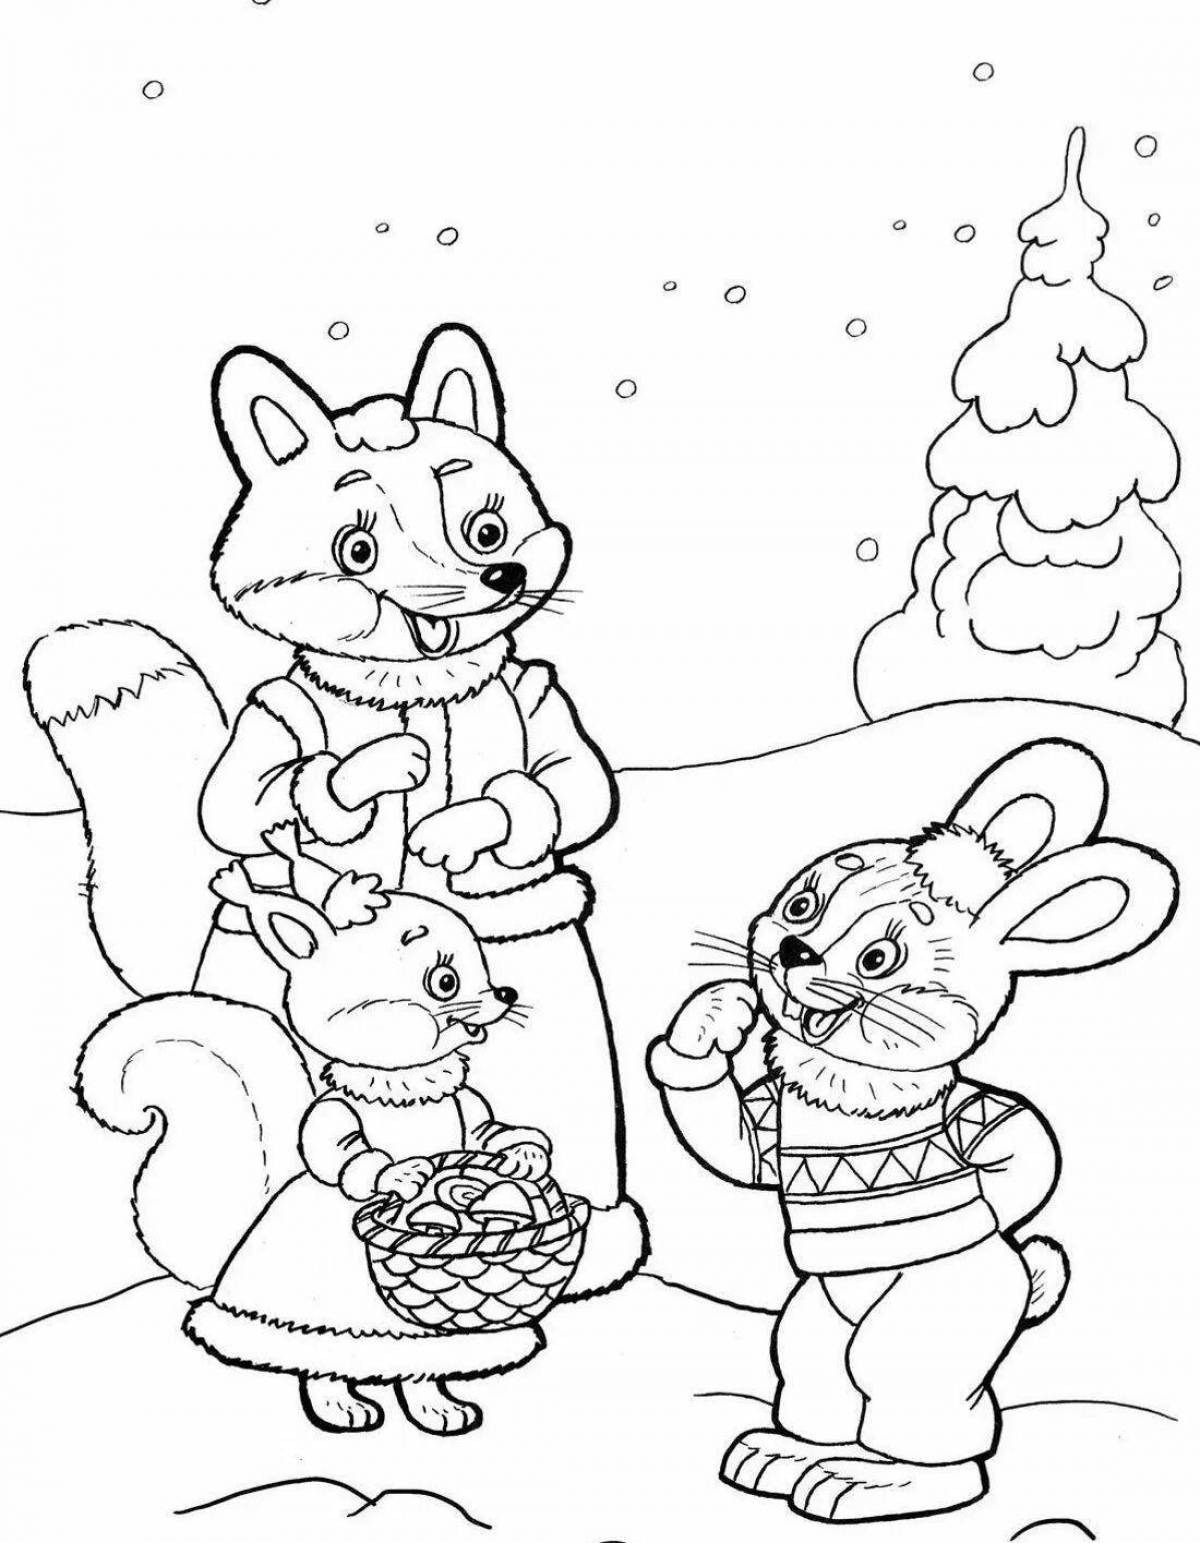 Fun coloring pages animals in winter